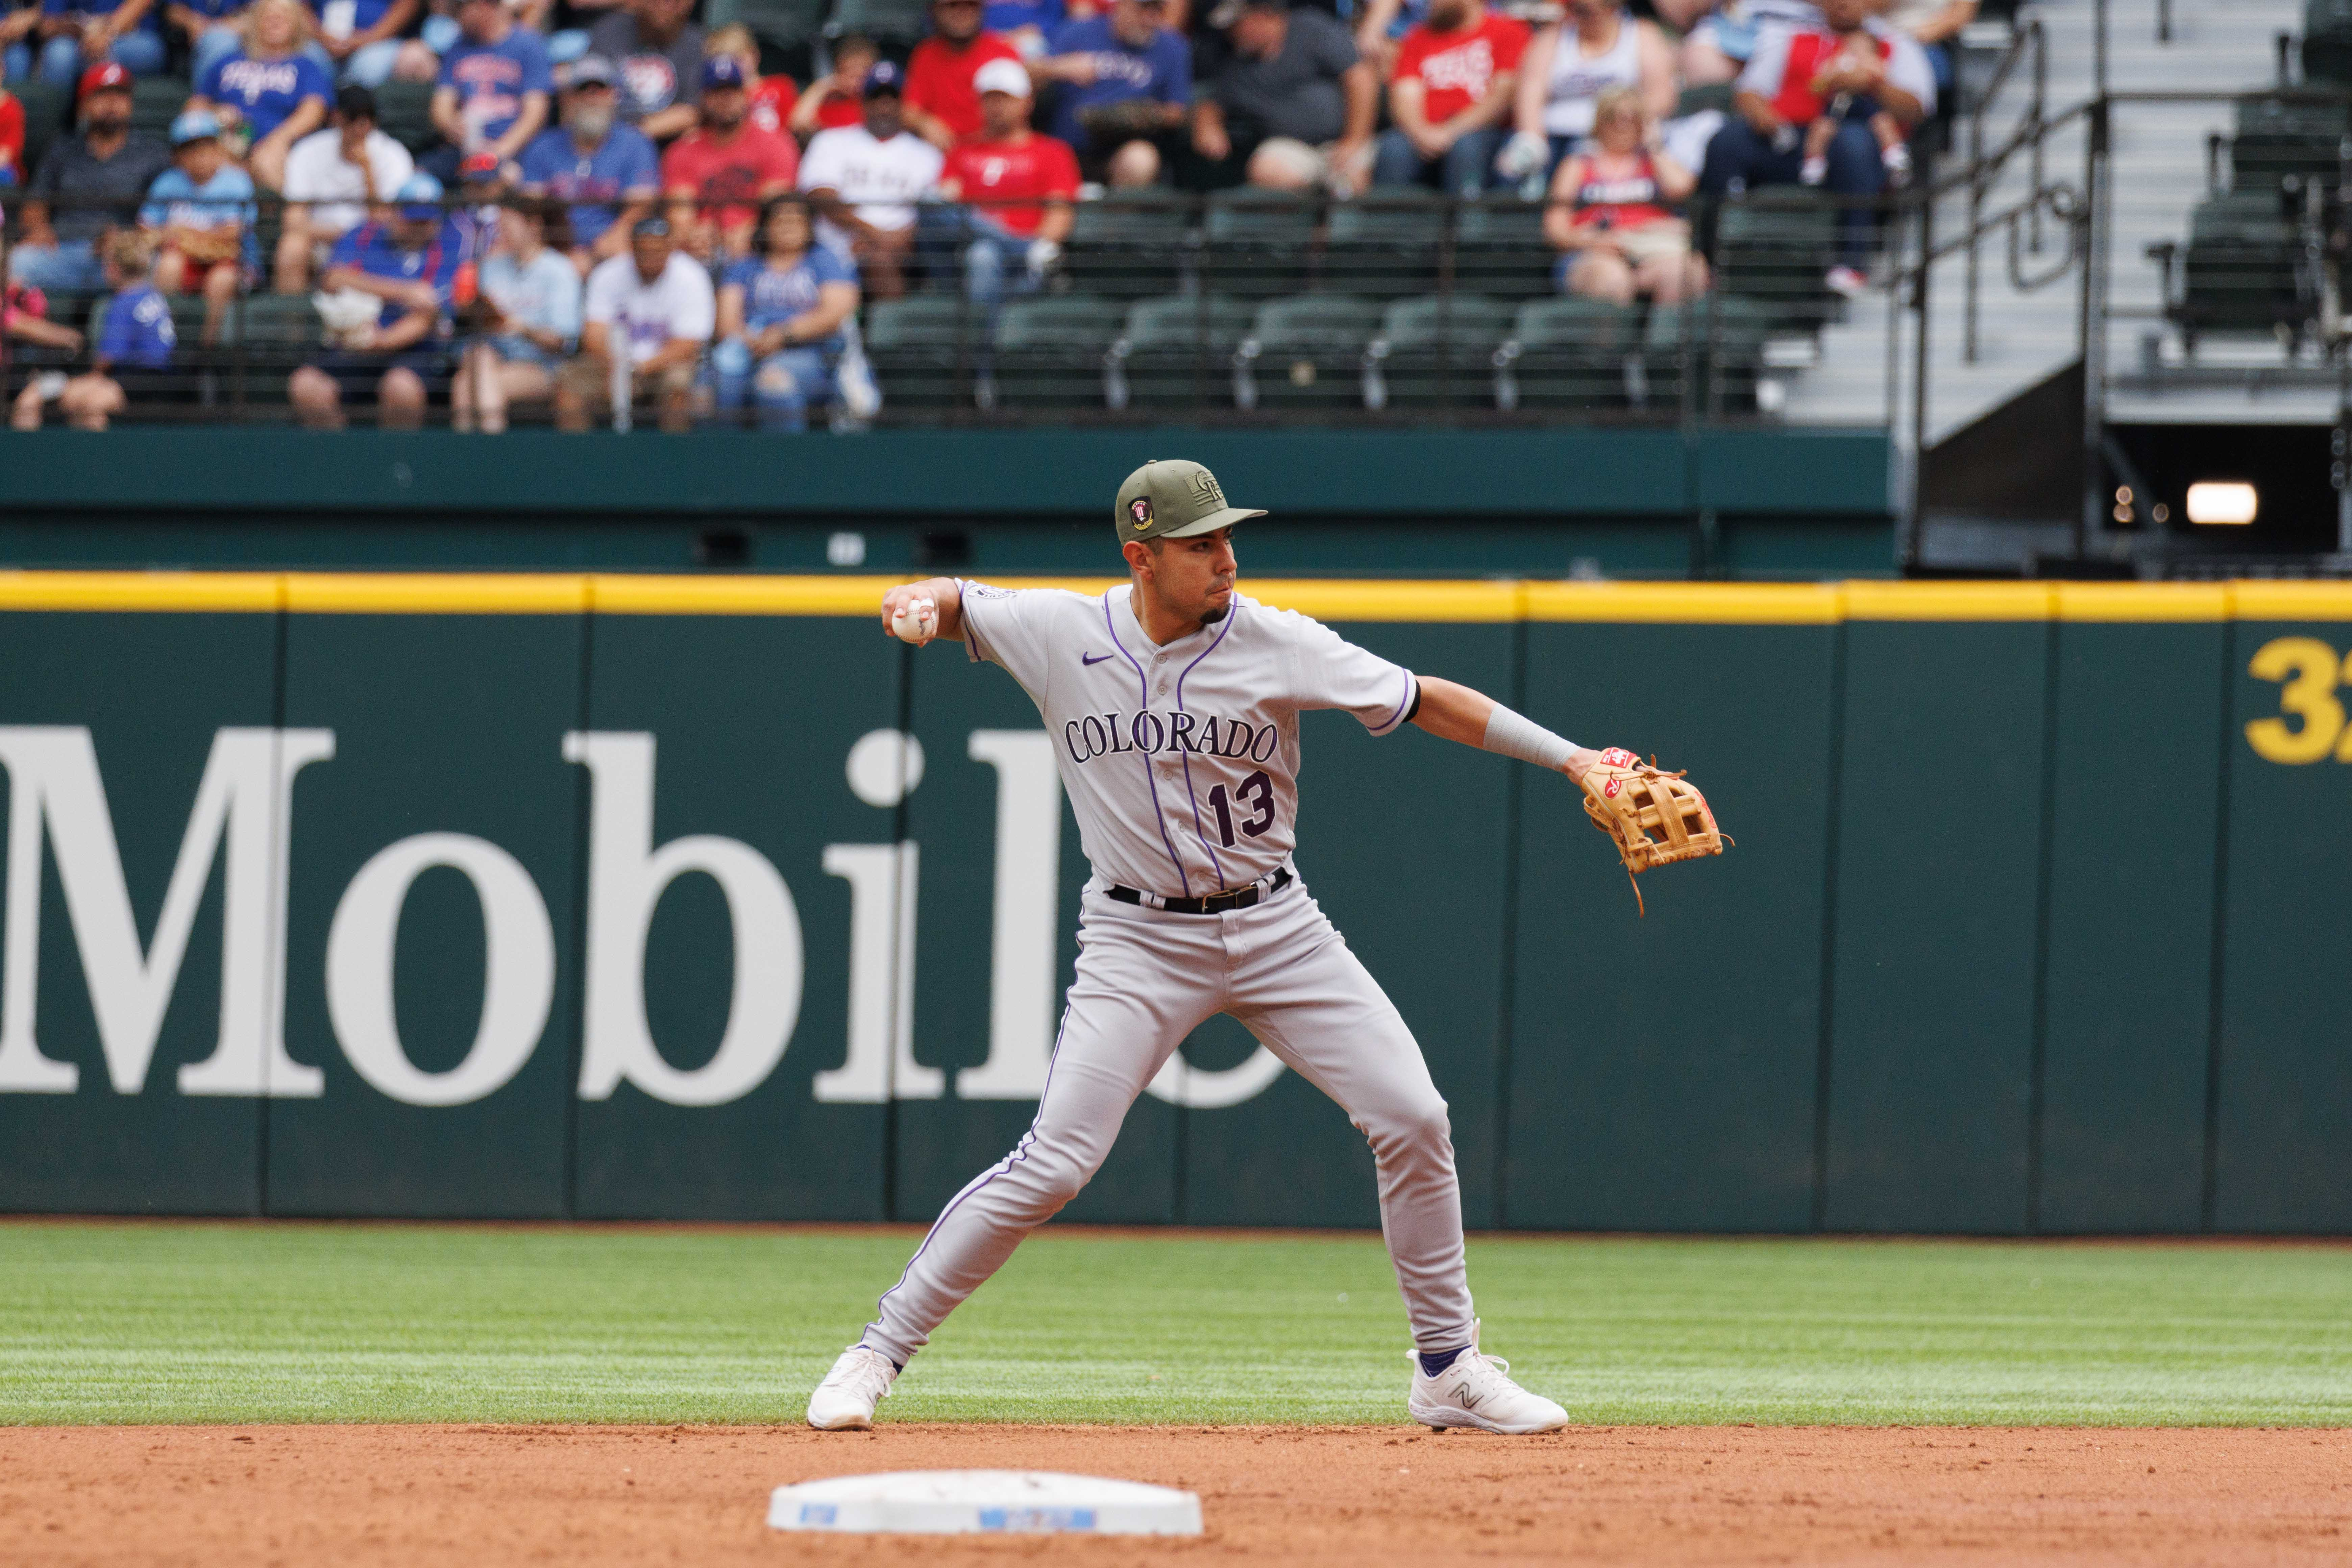 Rangers flex muscles in 13-3 rout to sweep Rockies